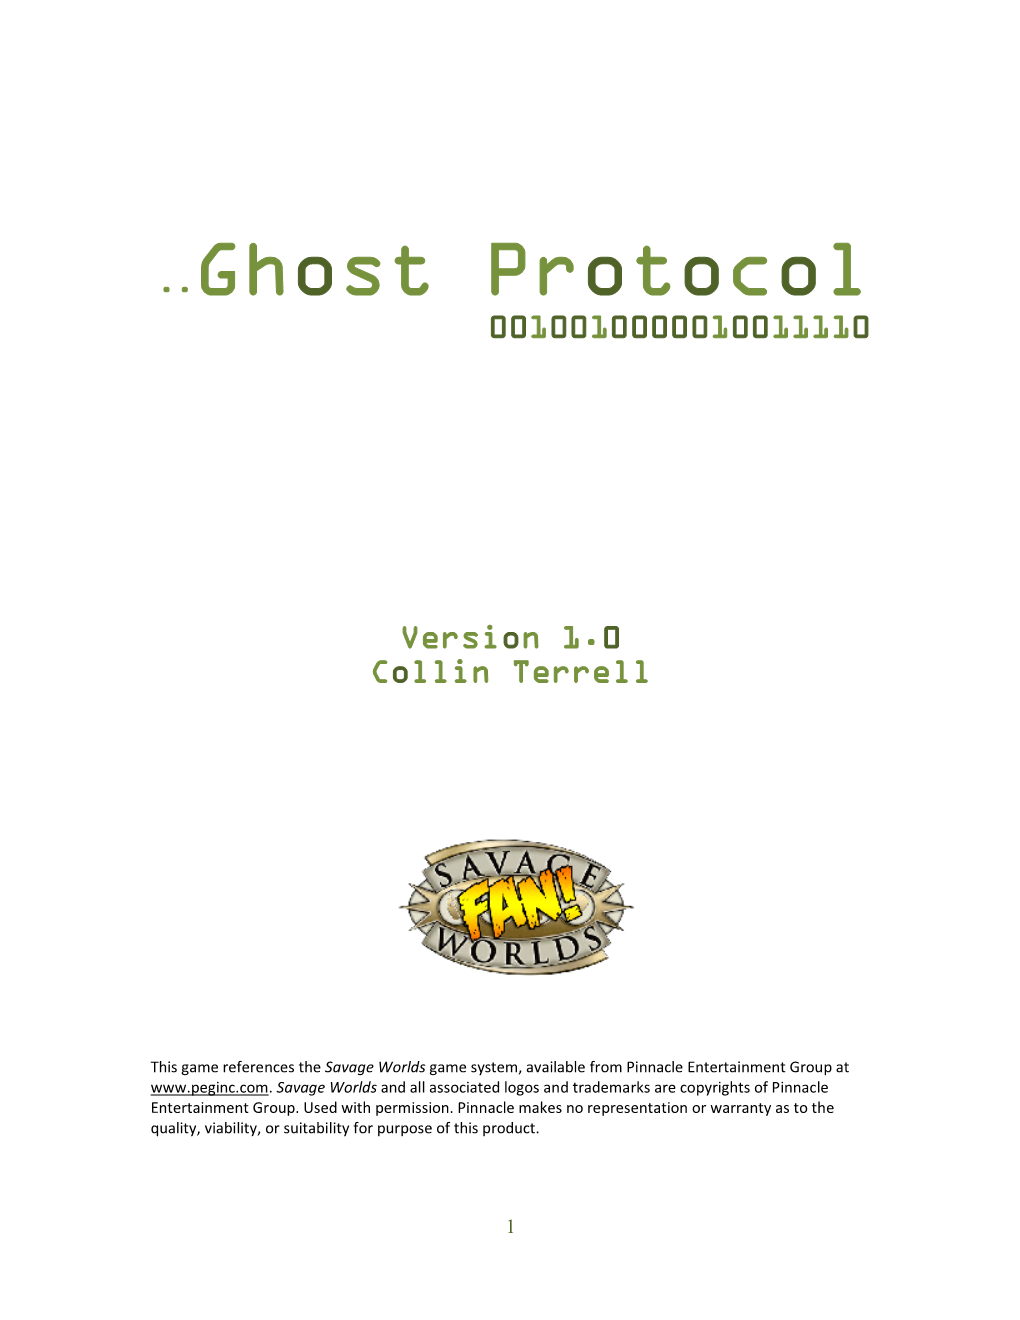 Ghost Protocol      0010010000010011110